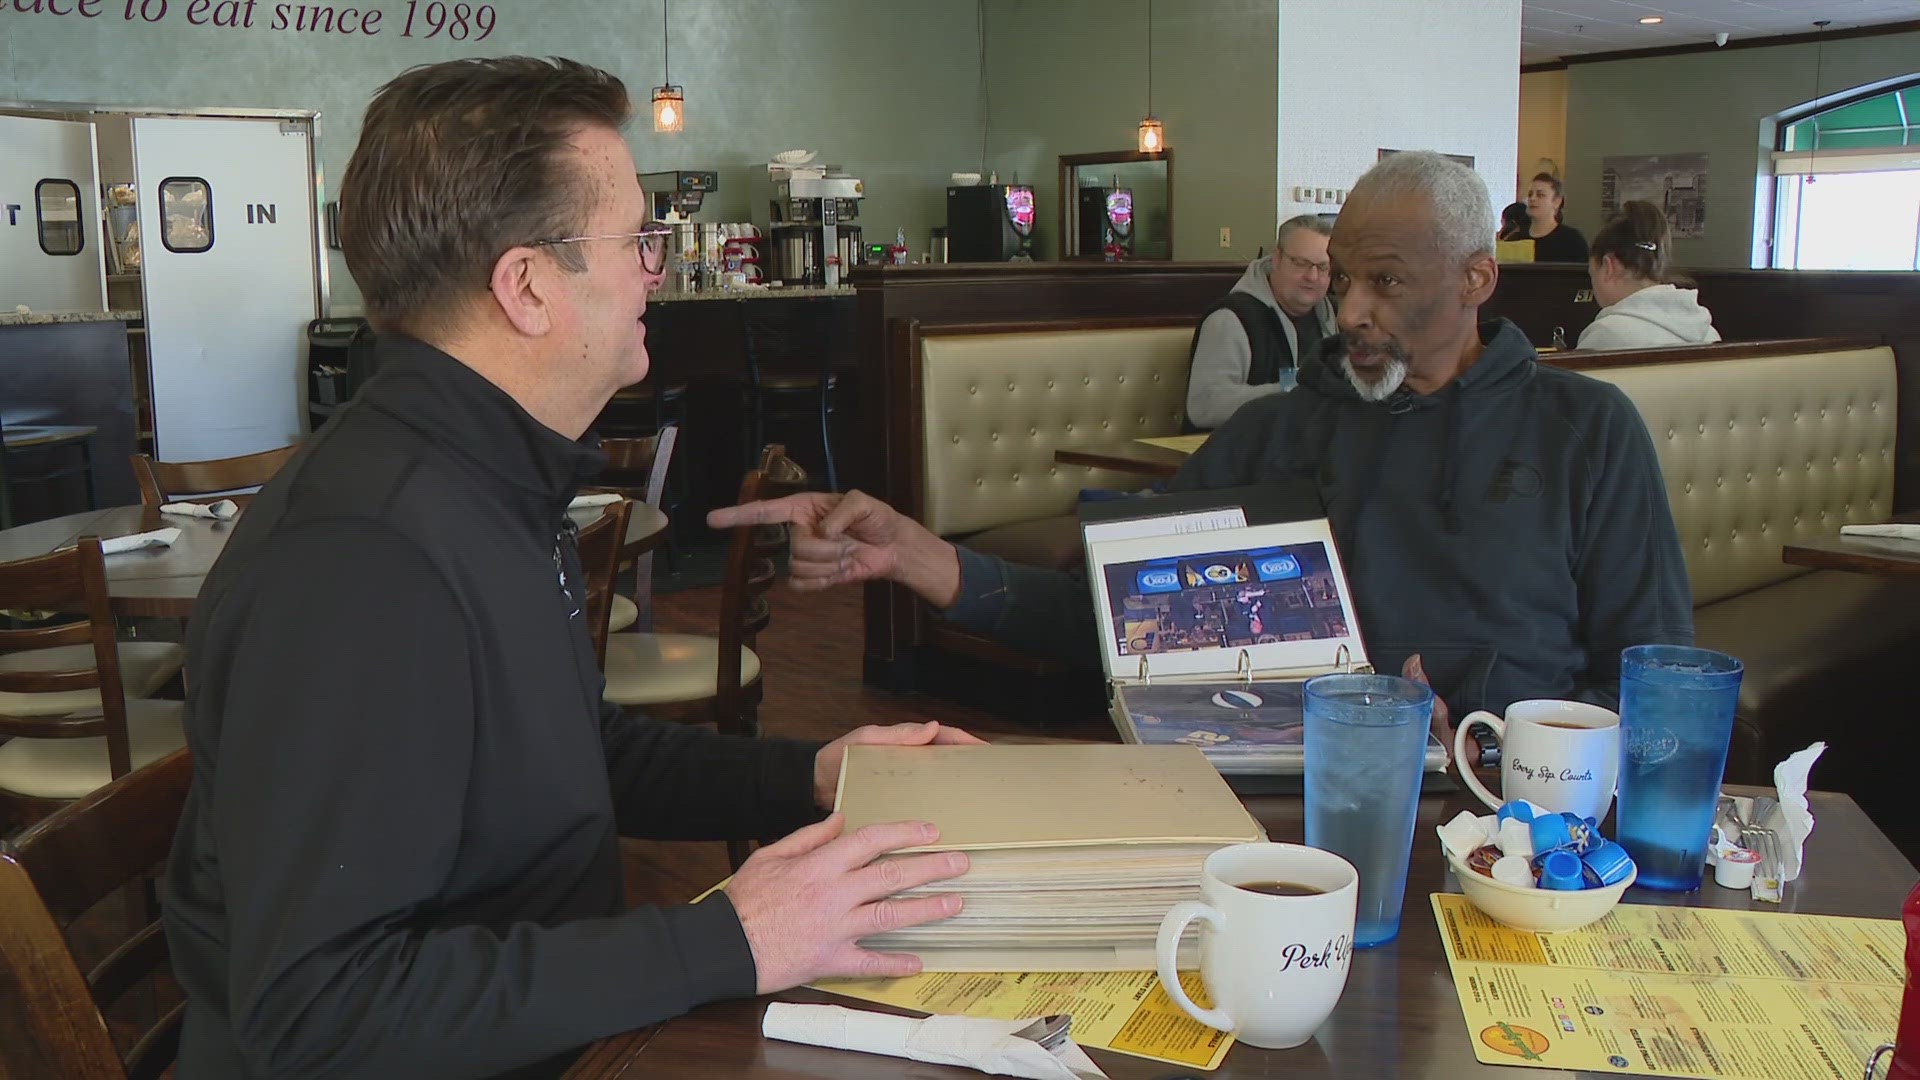 13Sports director Dave Calabro talks with the man who popularized dunking in the NBA, Darnell Hillman.